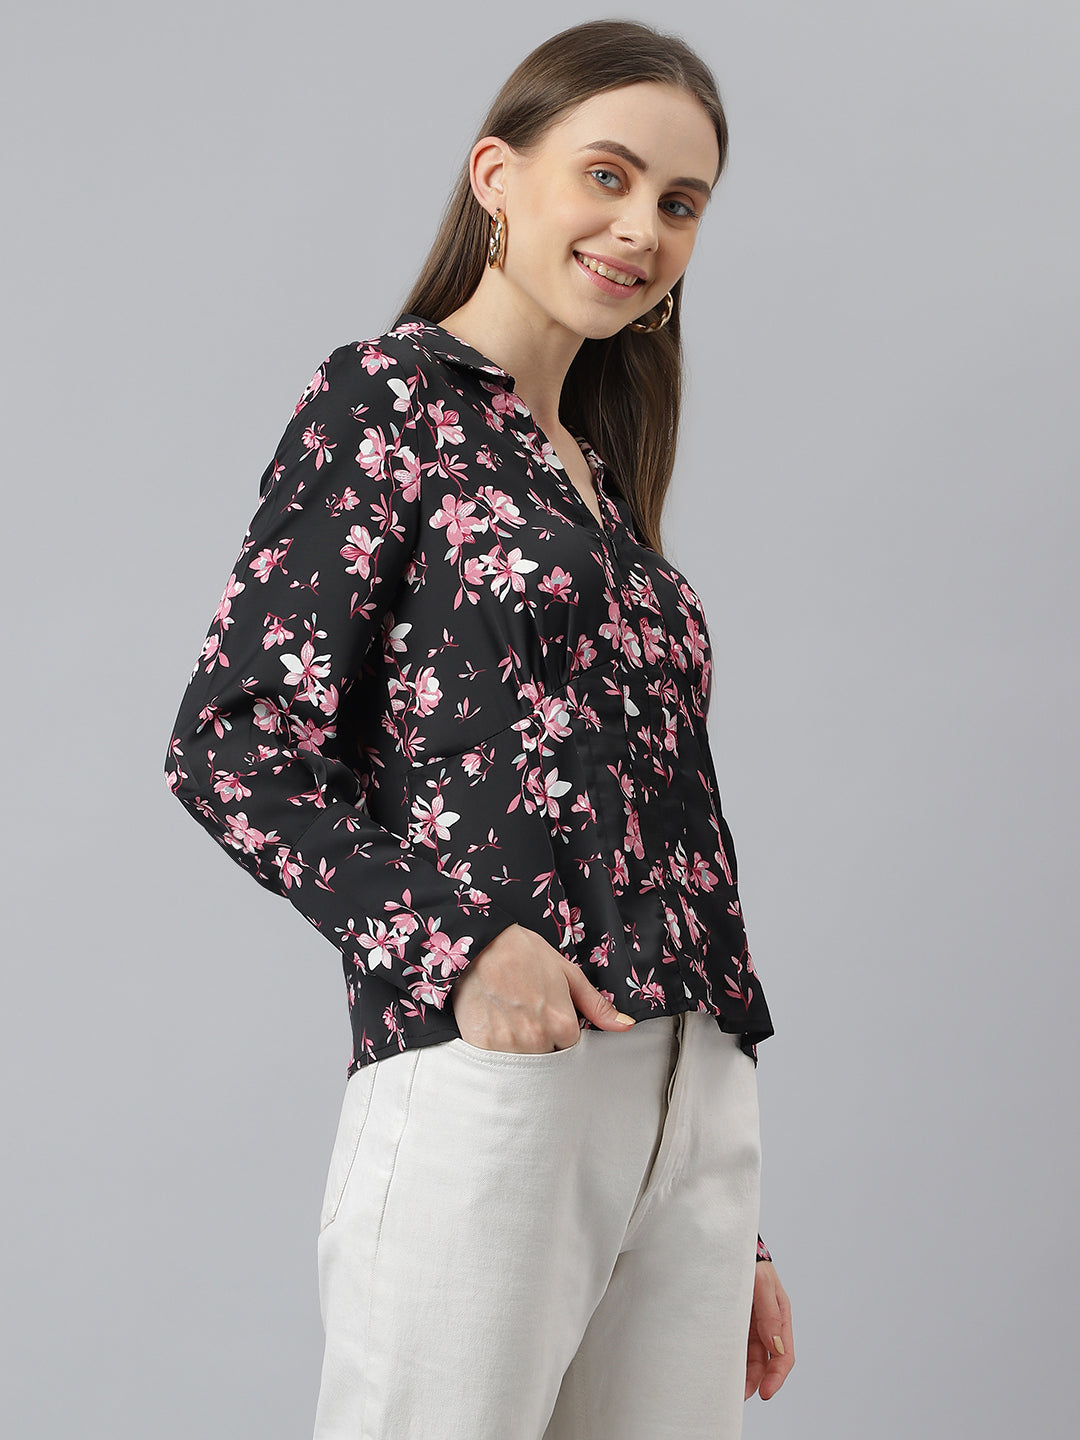 Black Full Sleeve Collar Neck Floral Print Women Shirt for Casual